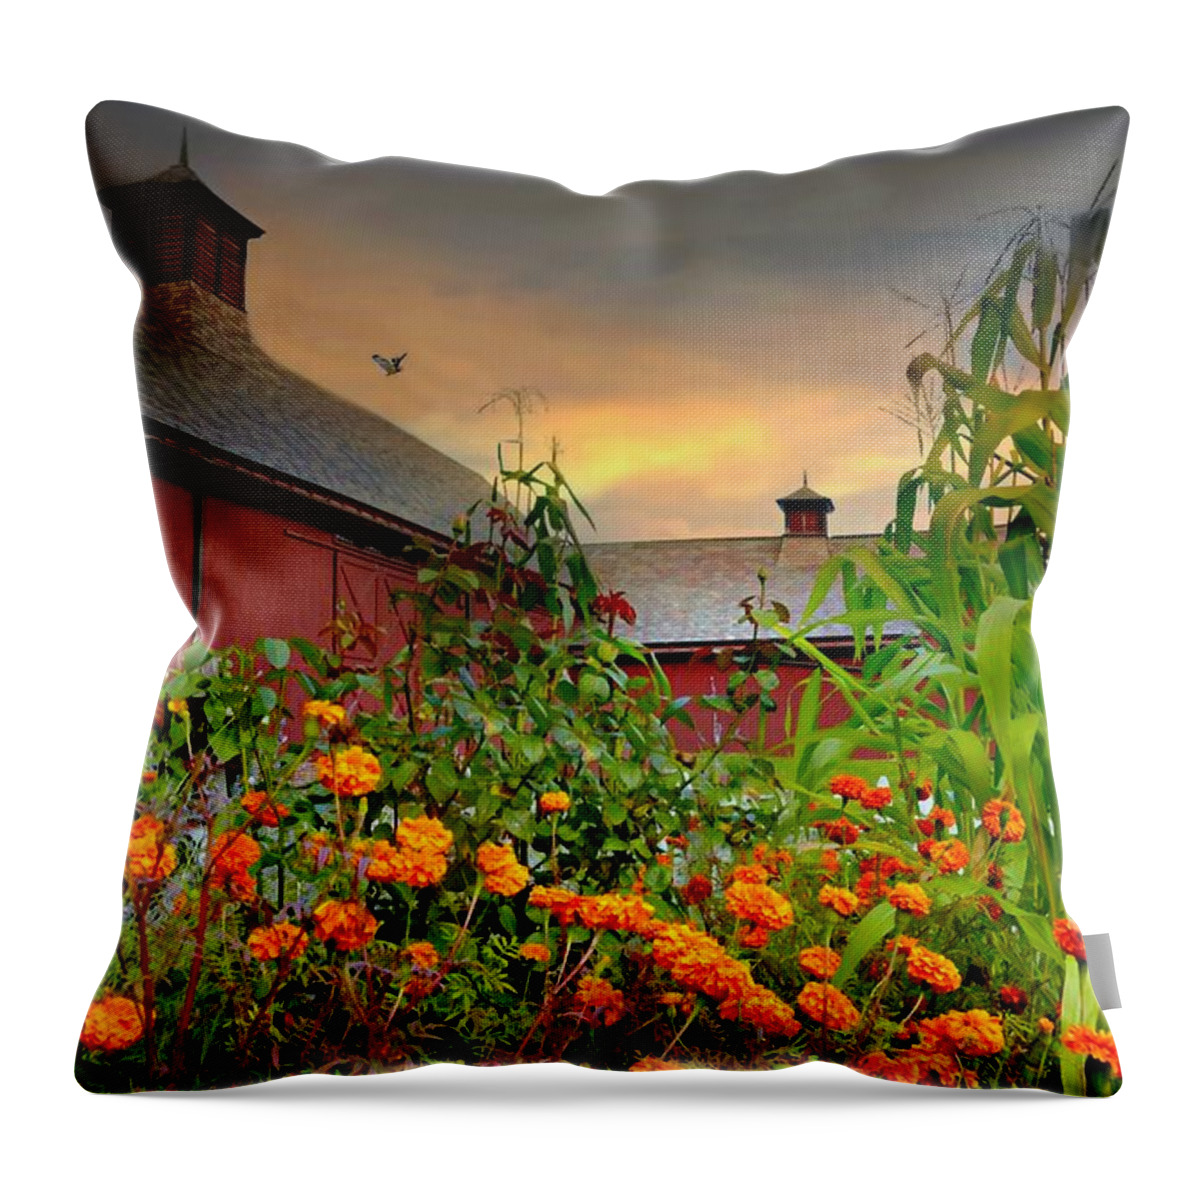 Country Squire Throw Pillow featuring the photograph Country Squire by Diana Angstadt